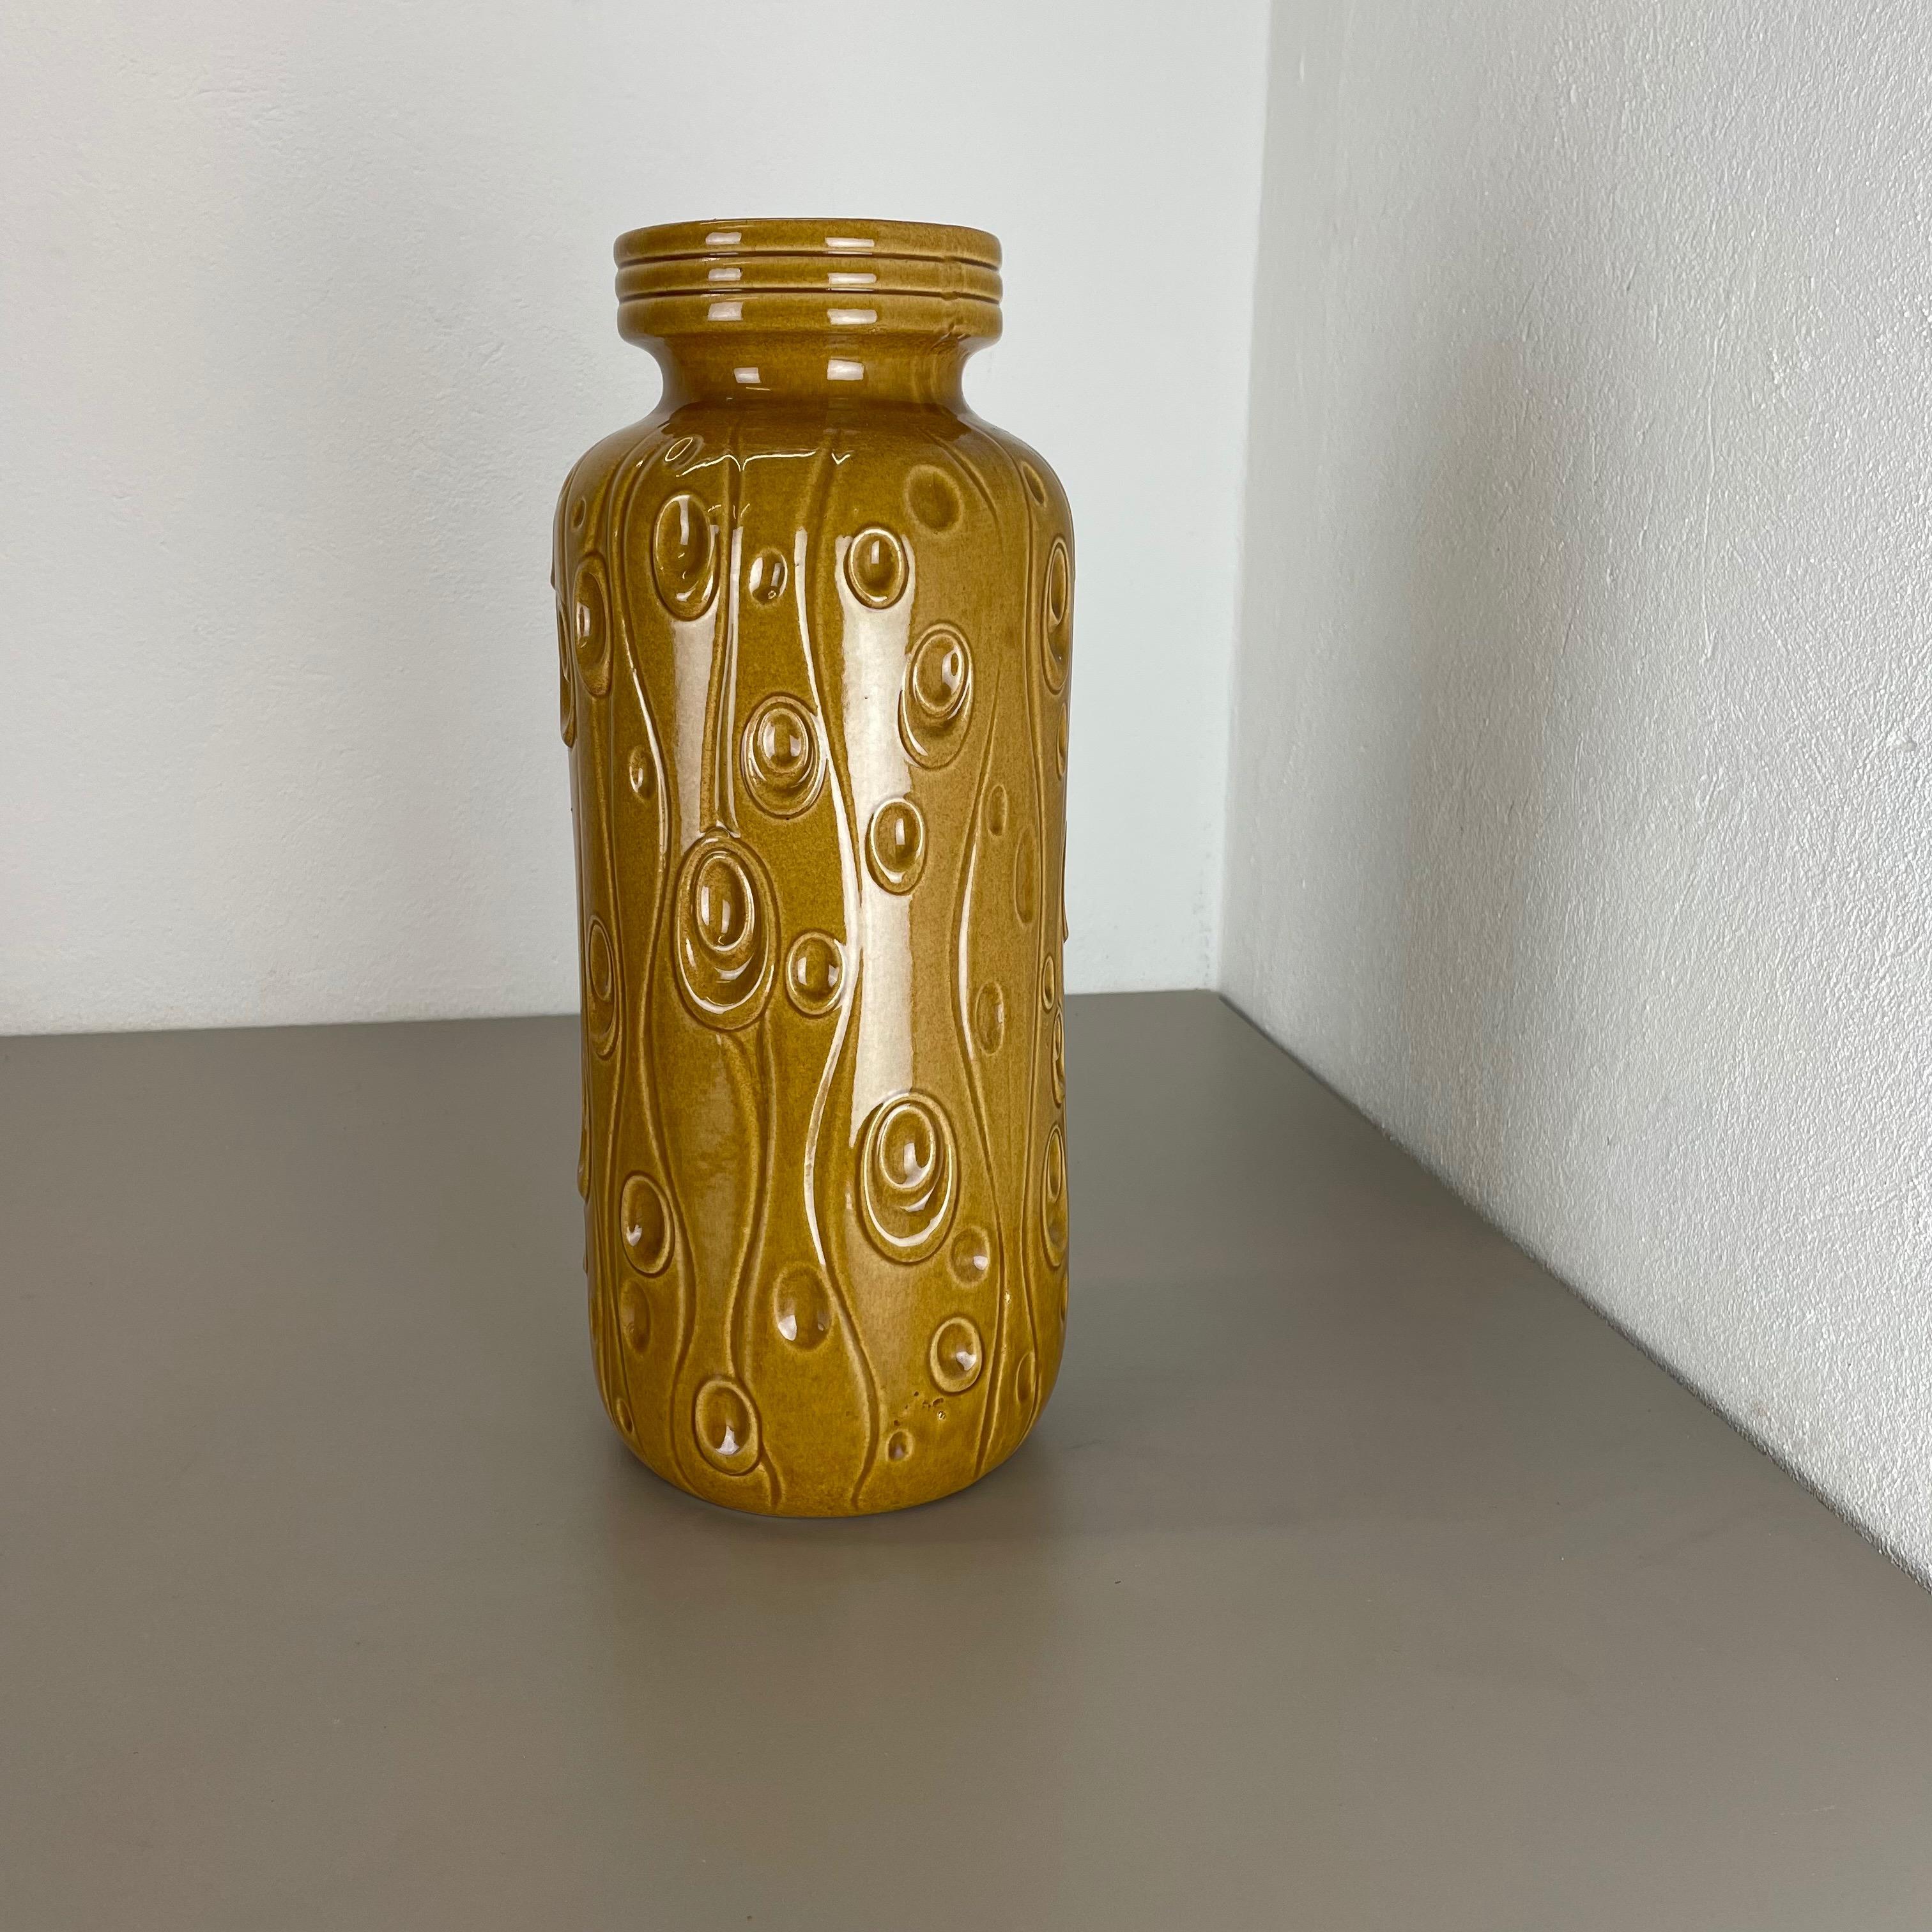 Article:

Fat lava art vase version


Model: 288-40


Producer:

Scheurich, Germany



Decade:

1970s


Description:

This original vintage vase was produced in the 1970s in Germany. It is made of ceramic pottery in fat lava